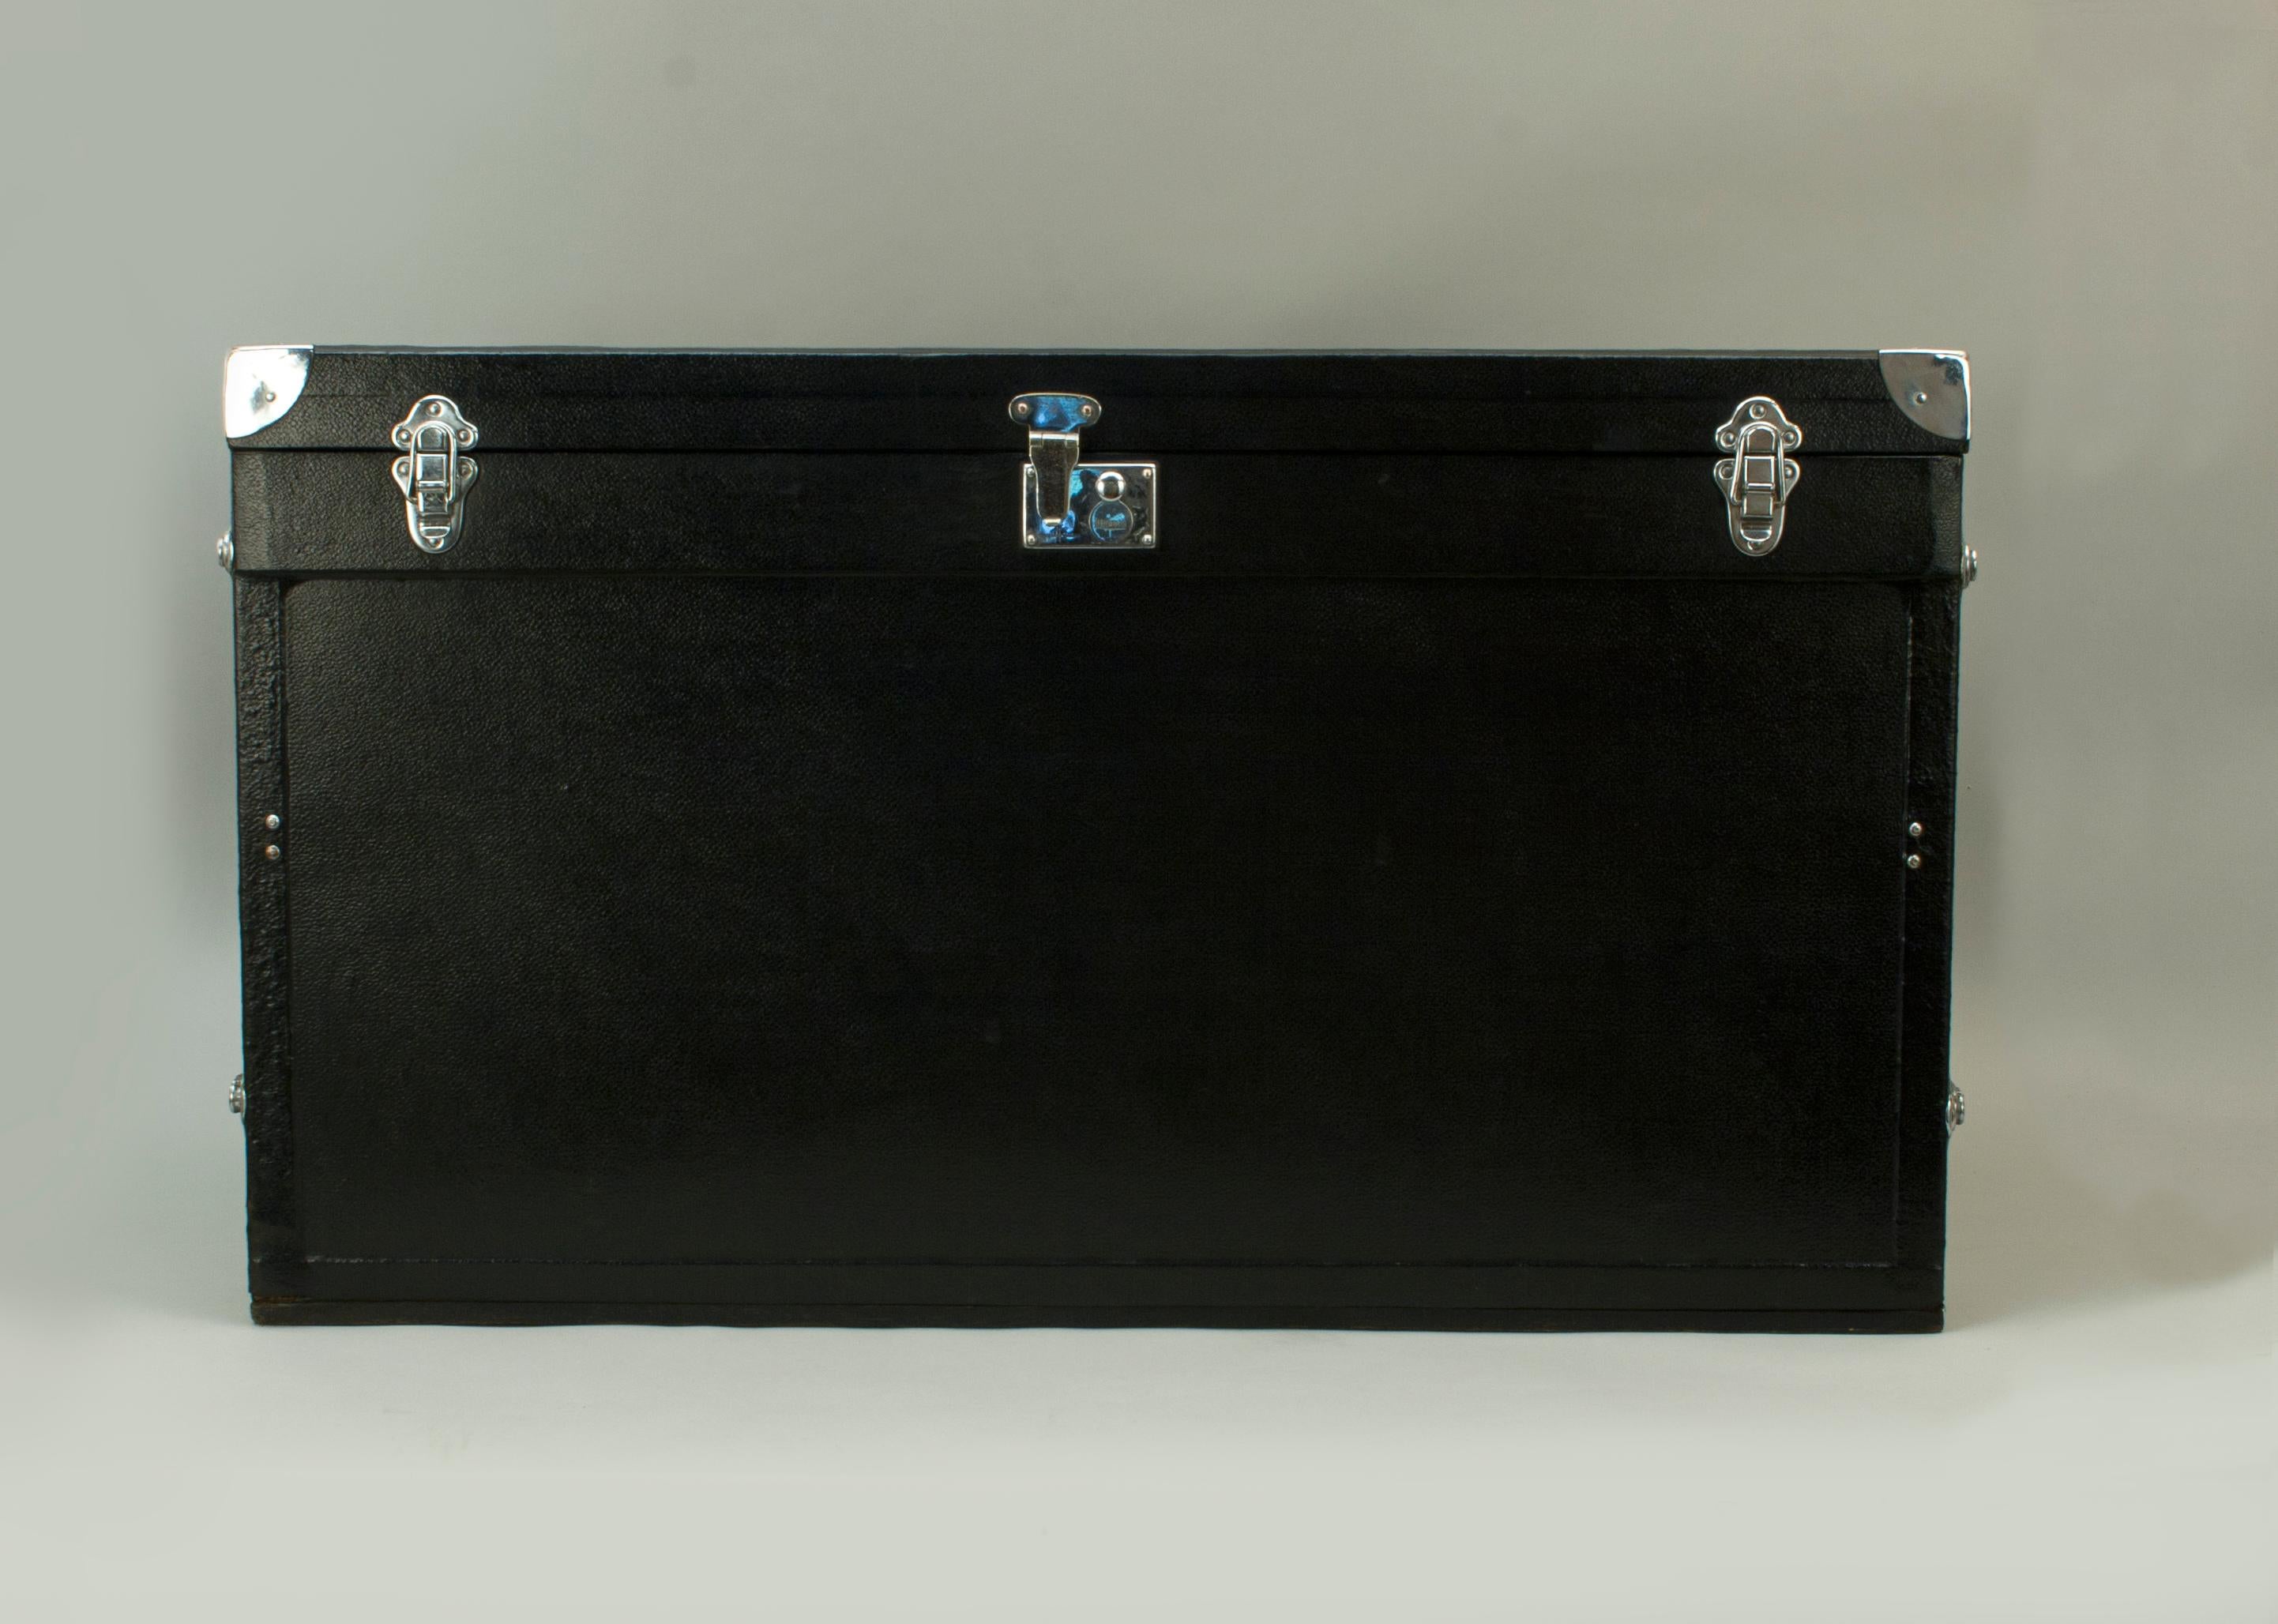 Early 20th Century Brooks Vintage Motoring Trunk with Three Inner Cases, Rolls Royce, Bentley